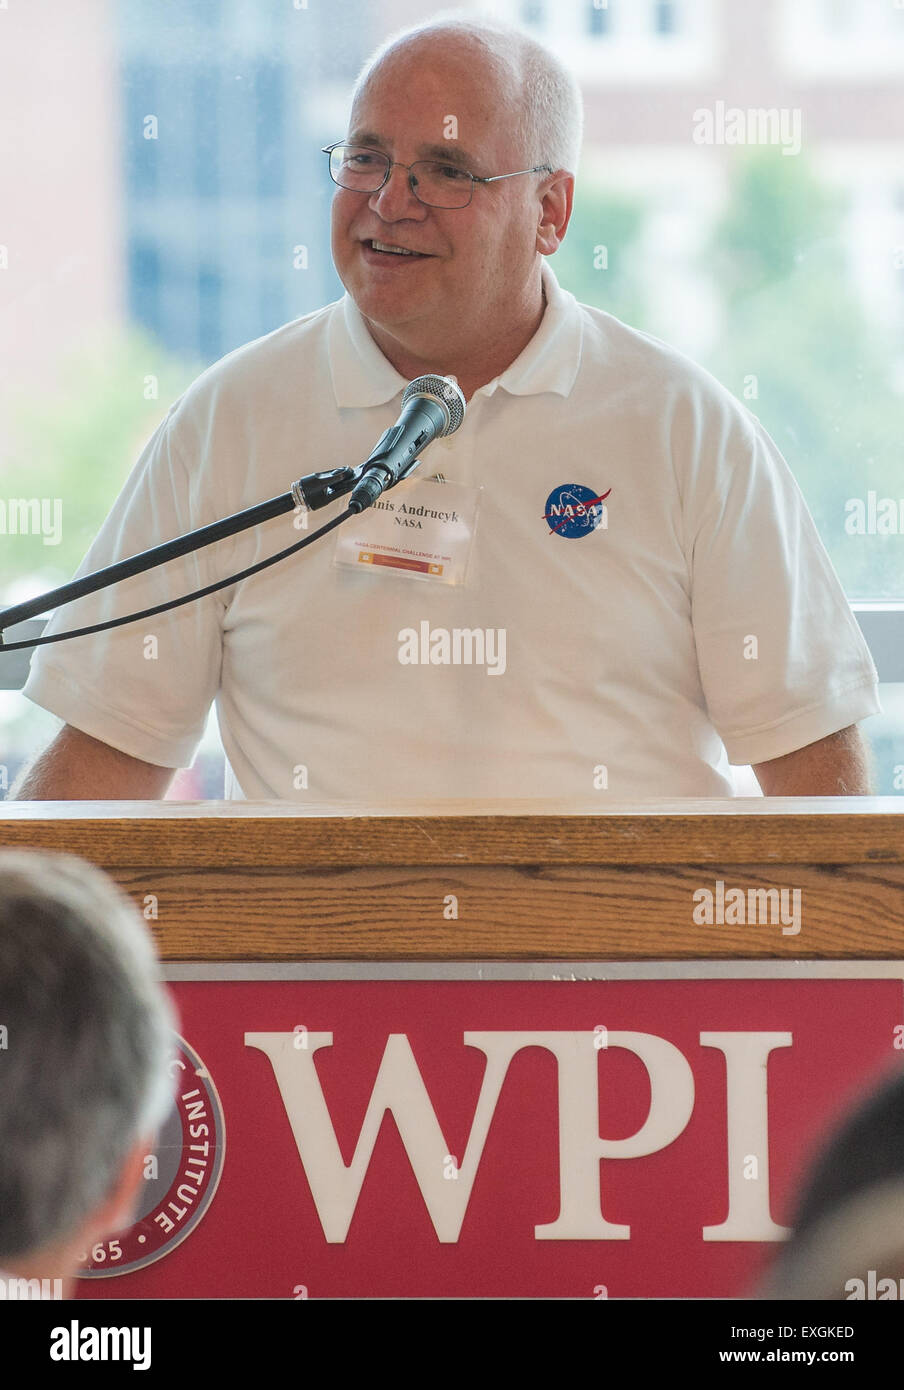 Dennis Andrucyk, deputy associate administrator for the Space Technology Mission Directorate at NASA Headquarters, speaks at a luncheon during the TouchTomorrow Festival, held in conjunction with the 2015 Sample Return Robot Challenge, Saturday, June 13, 2015 at the Worcester Polytechnic Institute (WPI) in Worcester, Mass.  Sixteen teams competed for a $1.5 million NASA prize purse. Teams will be required to demonstrate autonomous robots that can locate and collect samples from a wide and varied terrain, operating without human control. The objective of this NASA-WPI Centennial Challenge is to Stock Photo